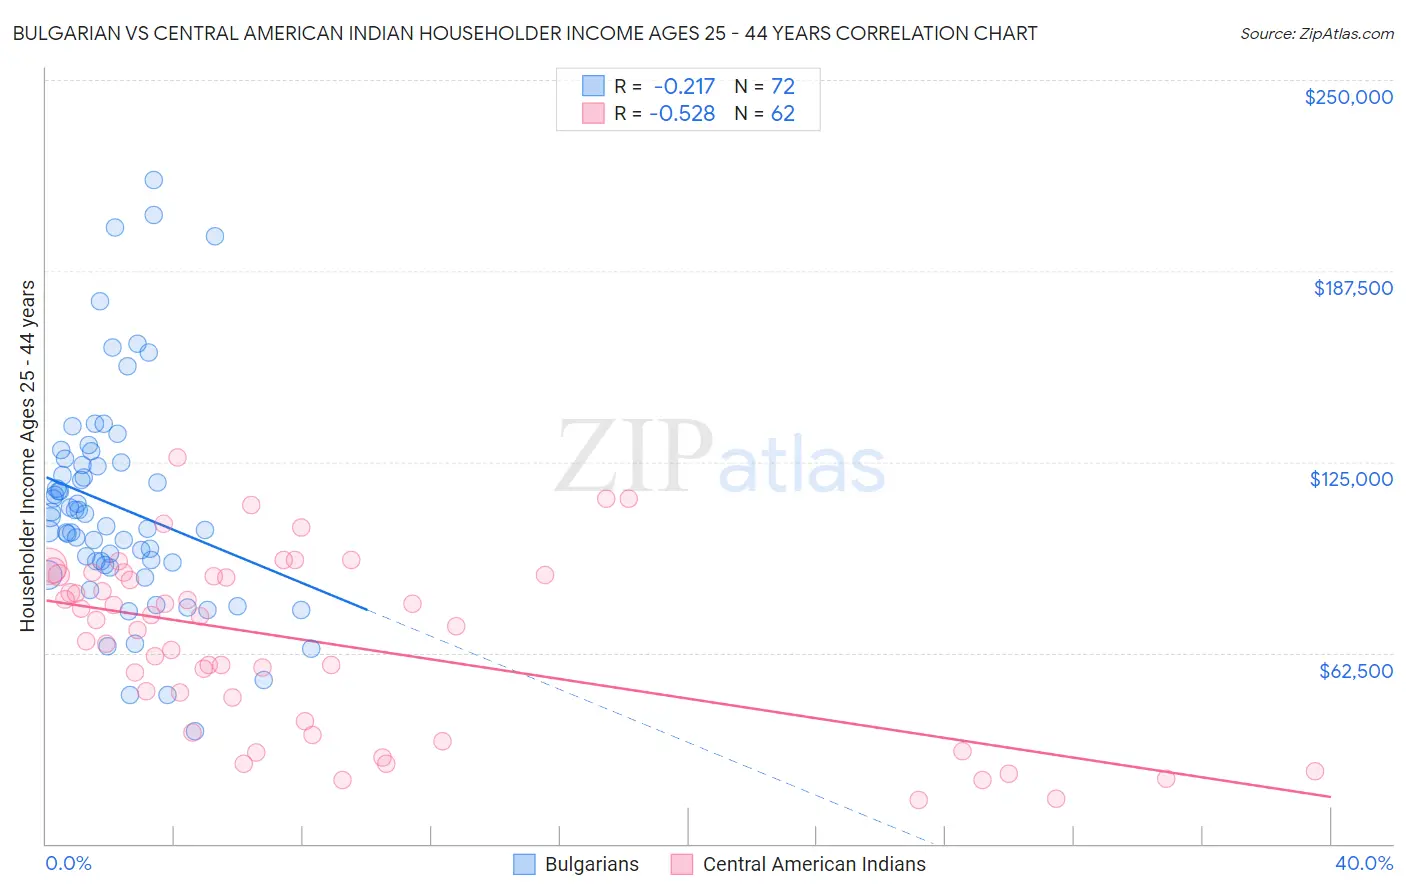 Bulgarian vs Central American Indian Householder Income Ages 25 - 44 years